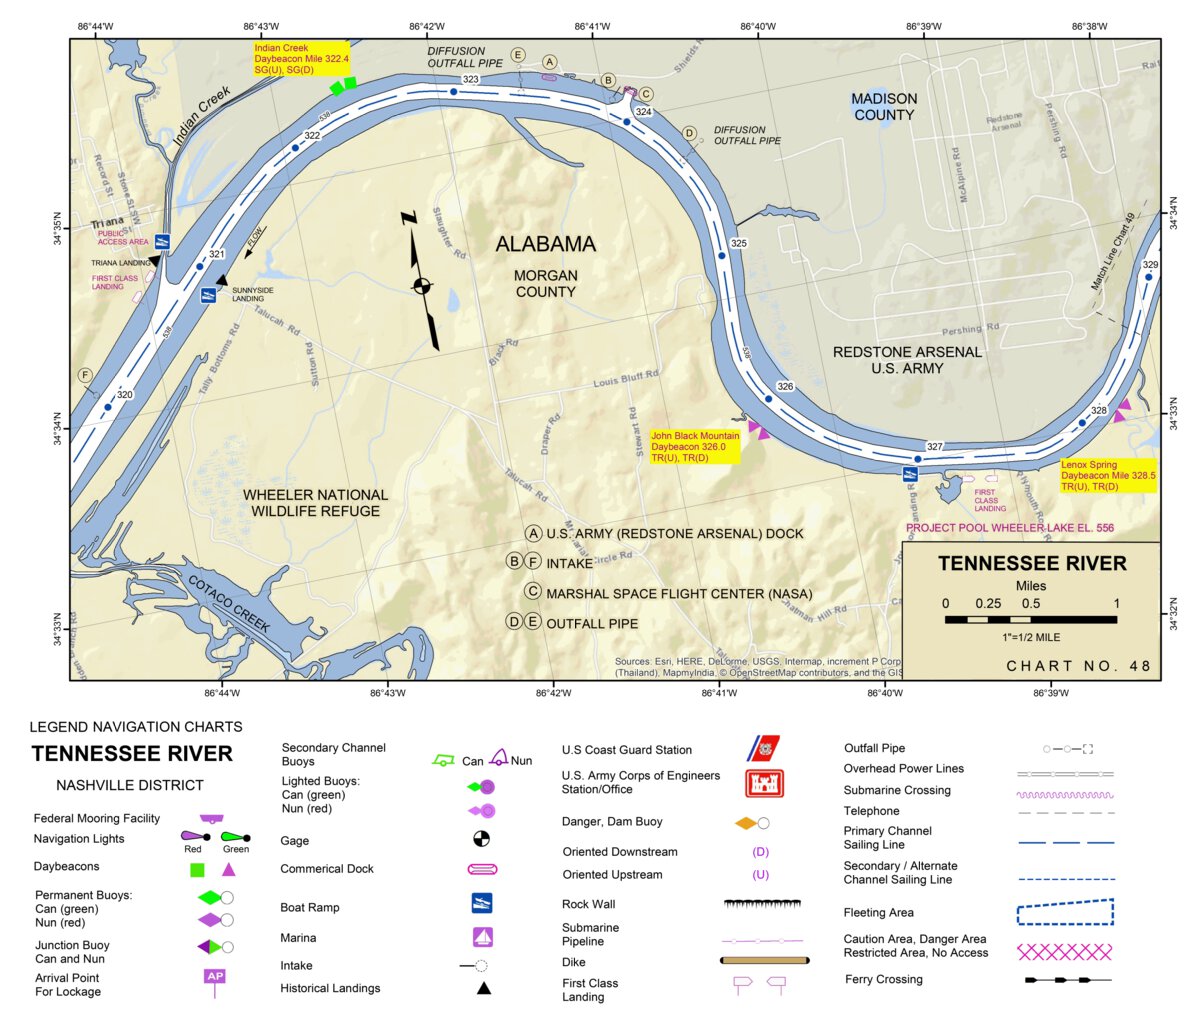 Tennessee River Chart 48 - Triana Landing; Indian Crk Bar, Lewis